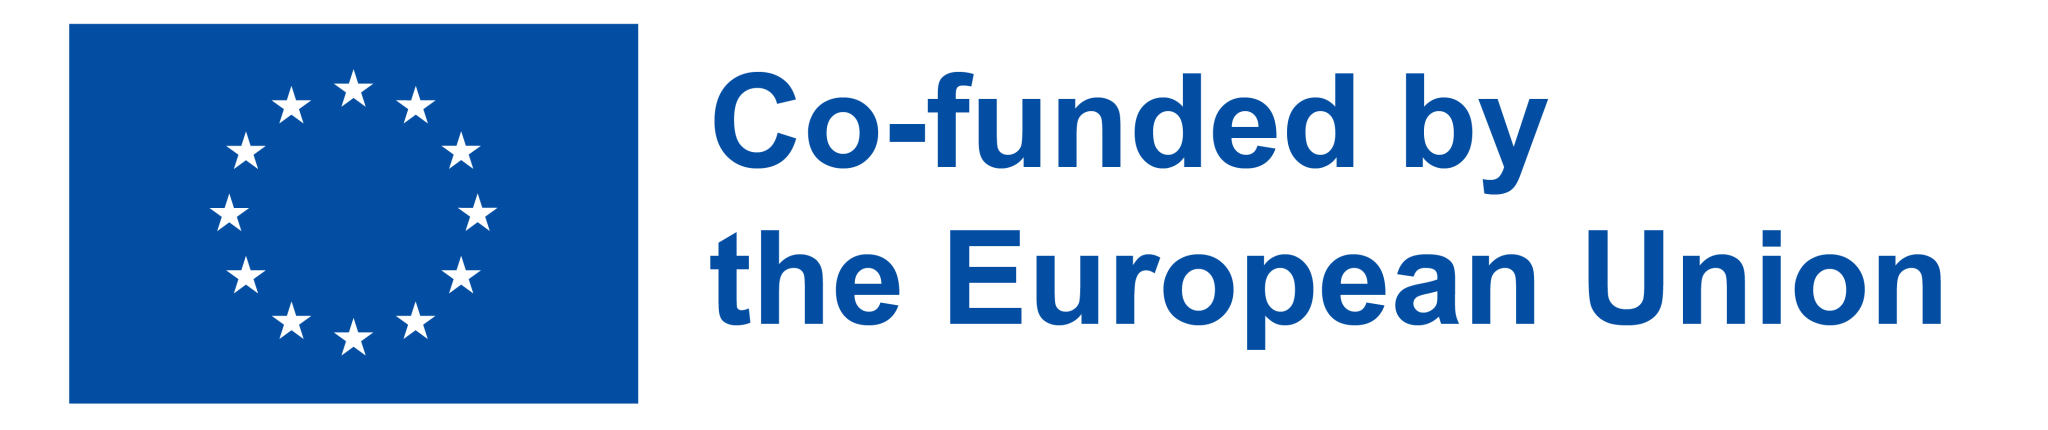 European Heritage Alliance – coordinated by Europa Nostra